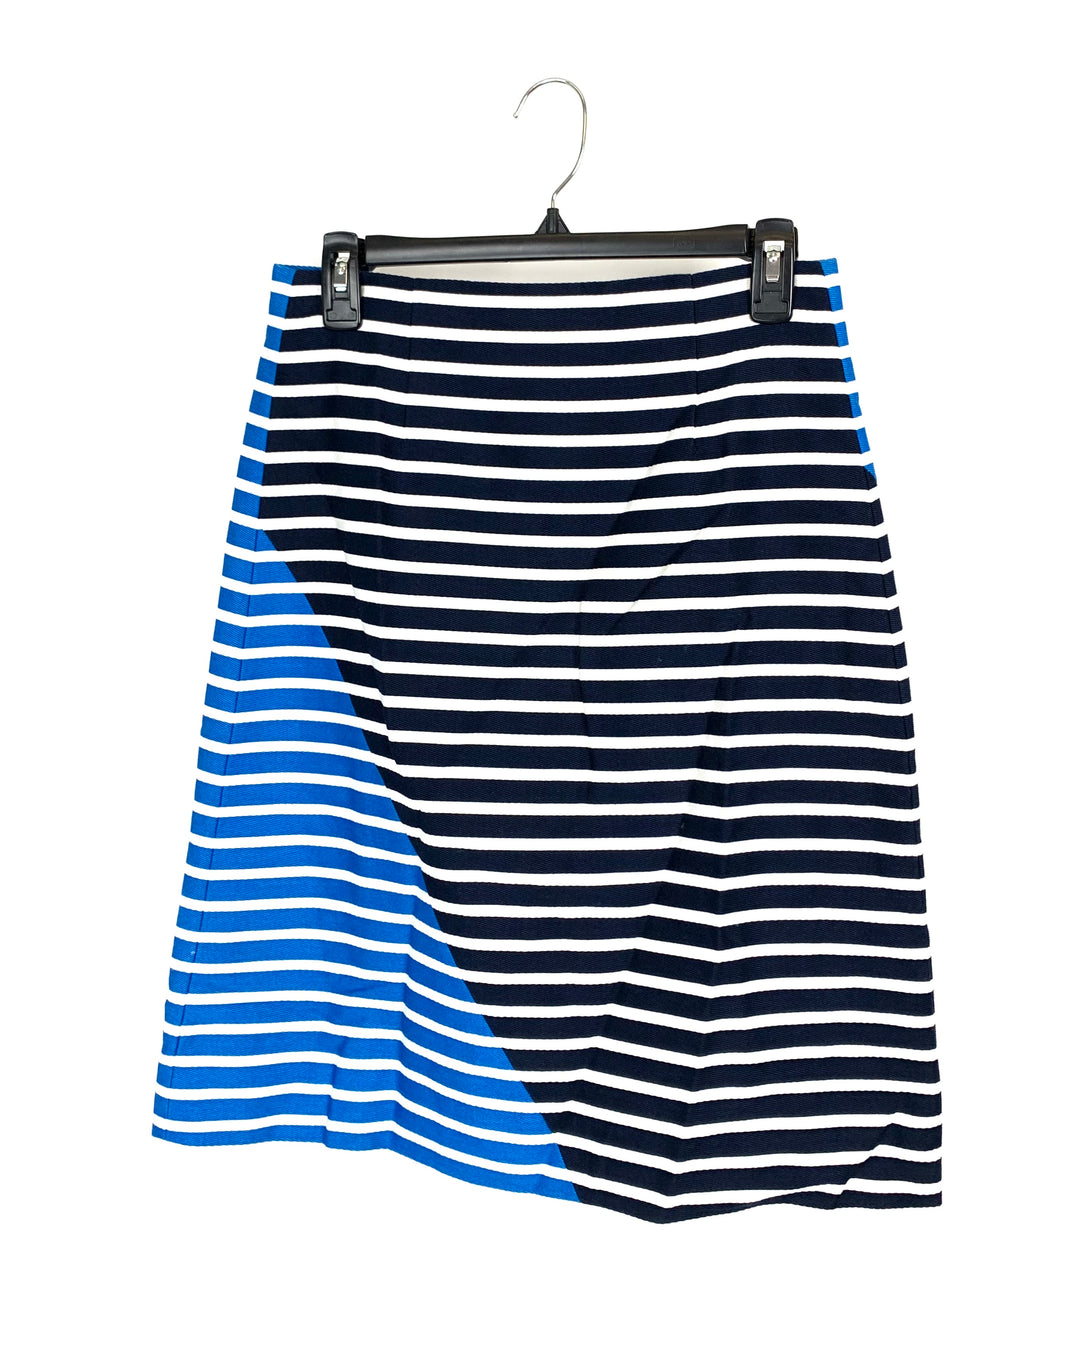 Blue and Black Skirt with Stripes - Size 4